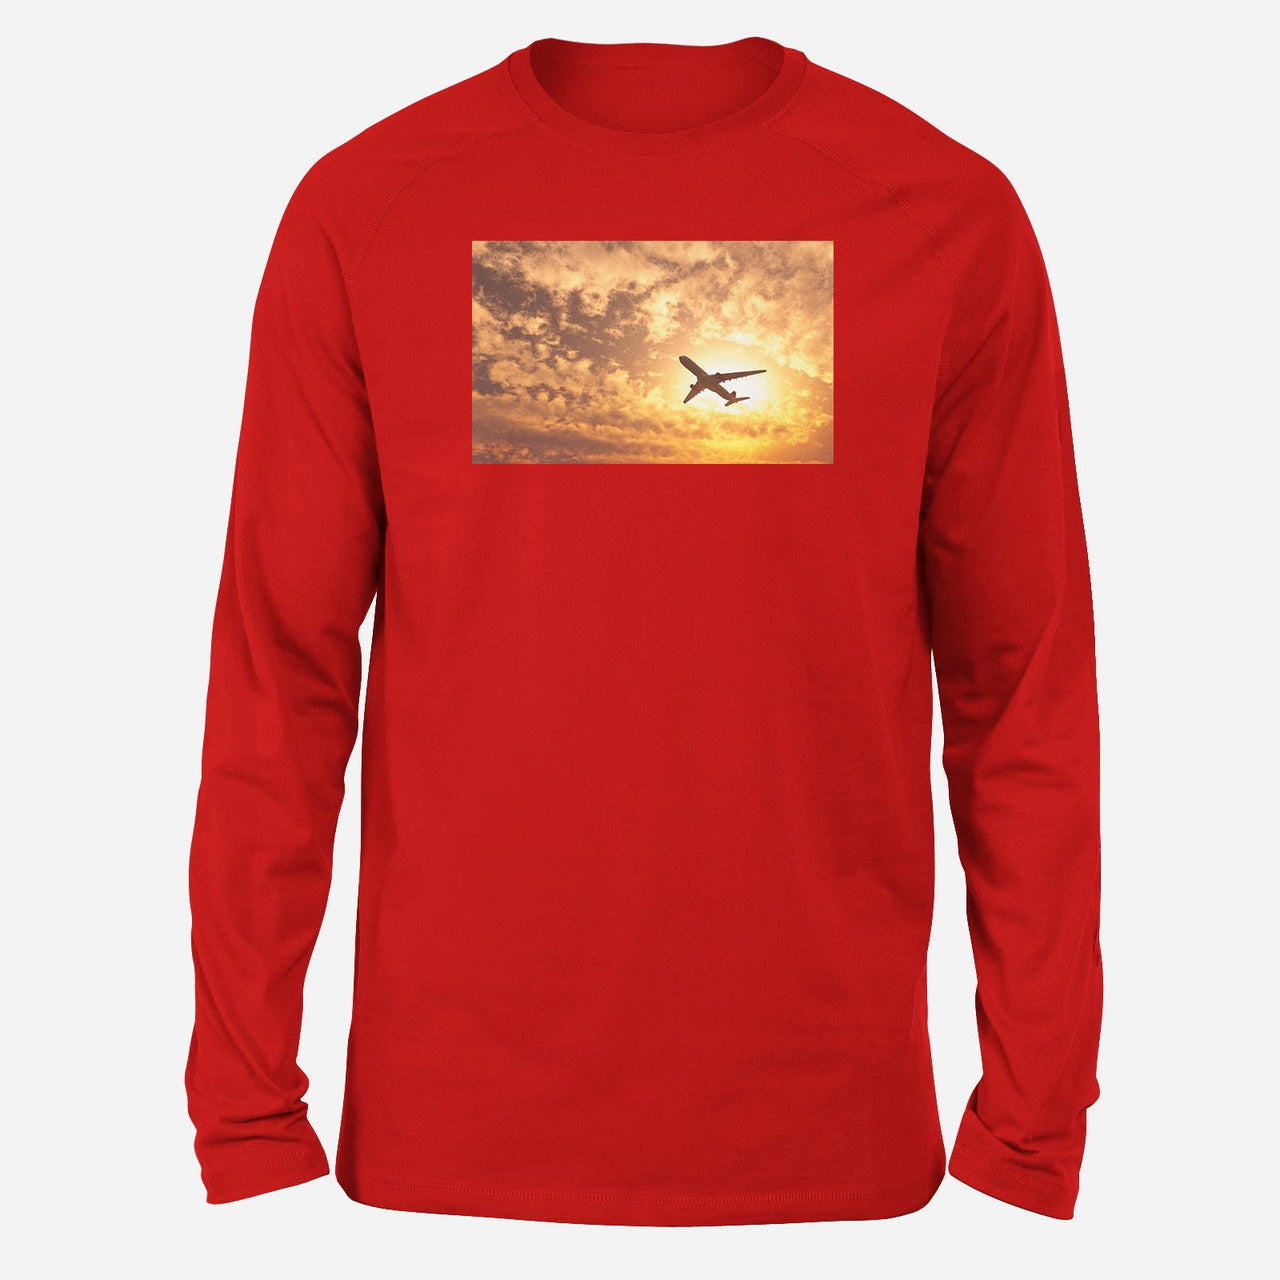 Plane Passing By Designed Long-Sleeve T-Shirts